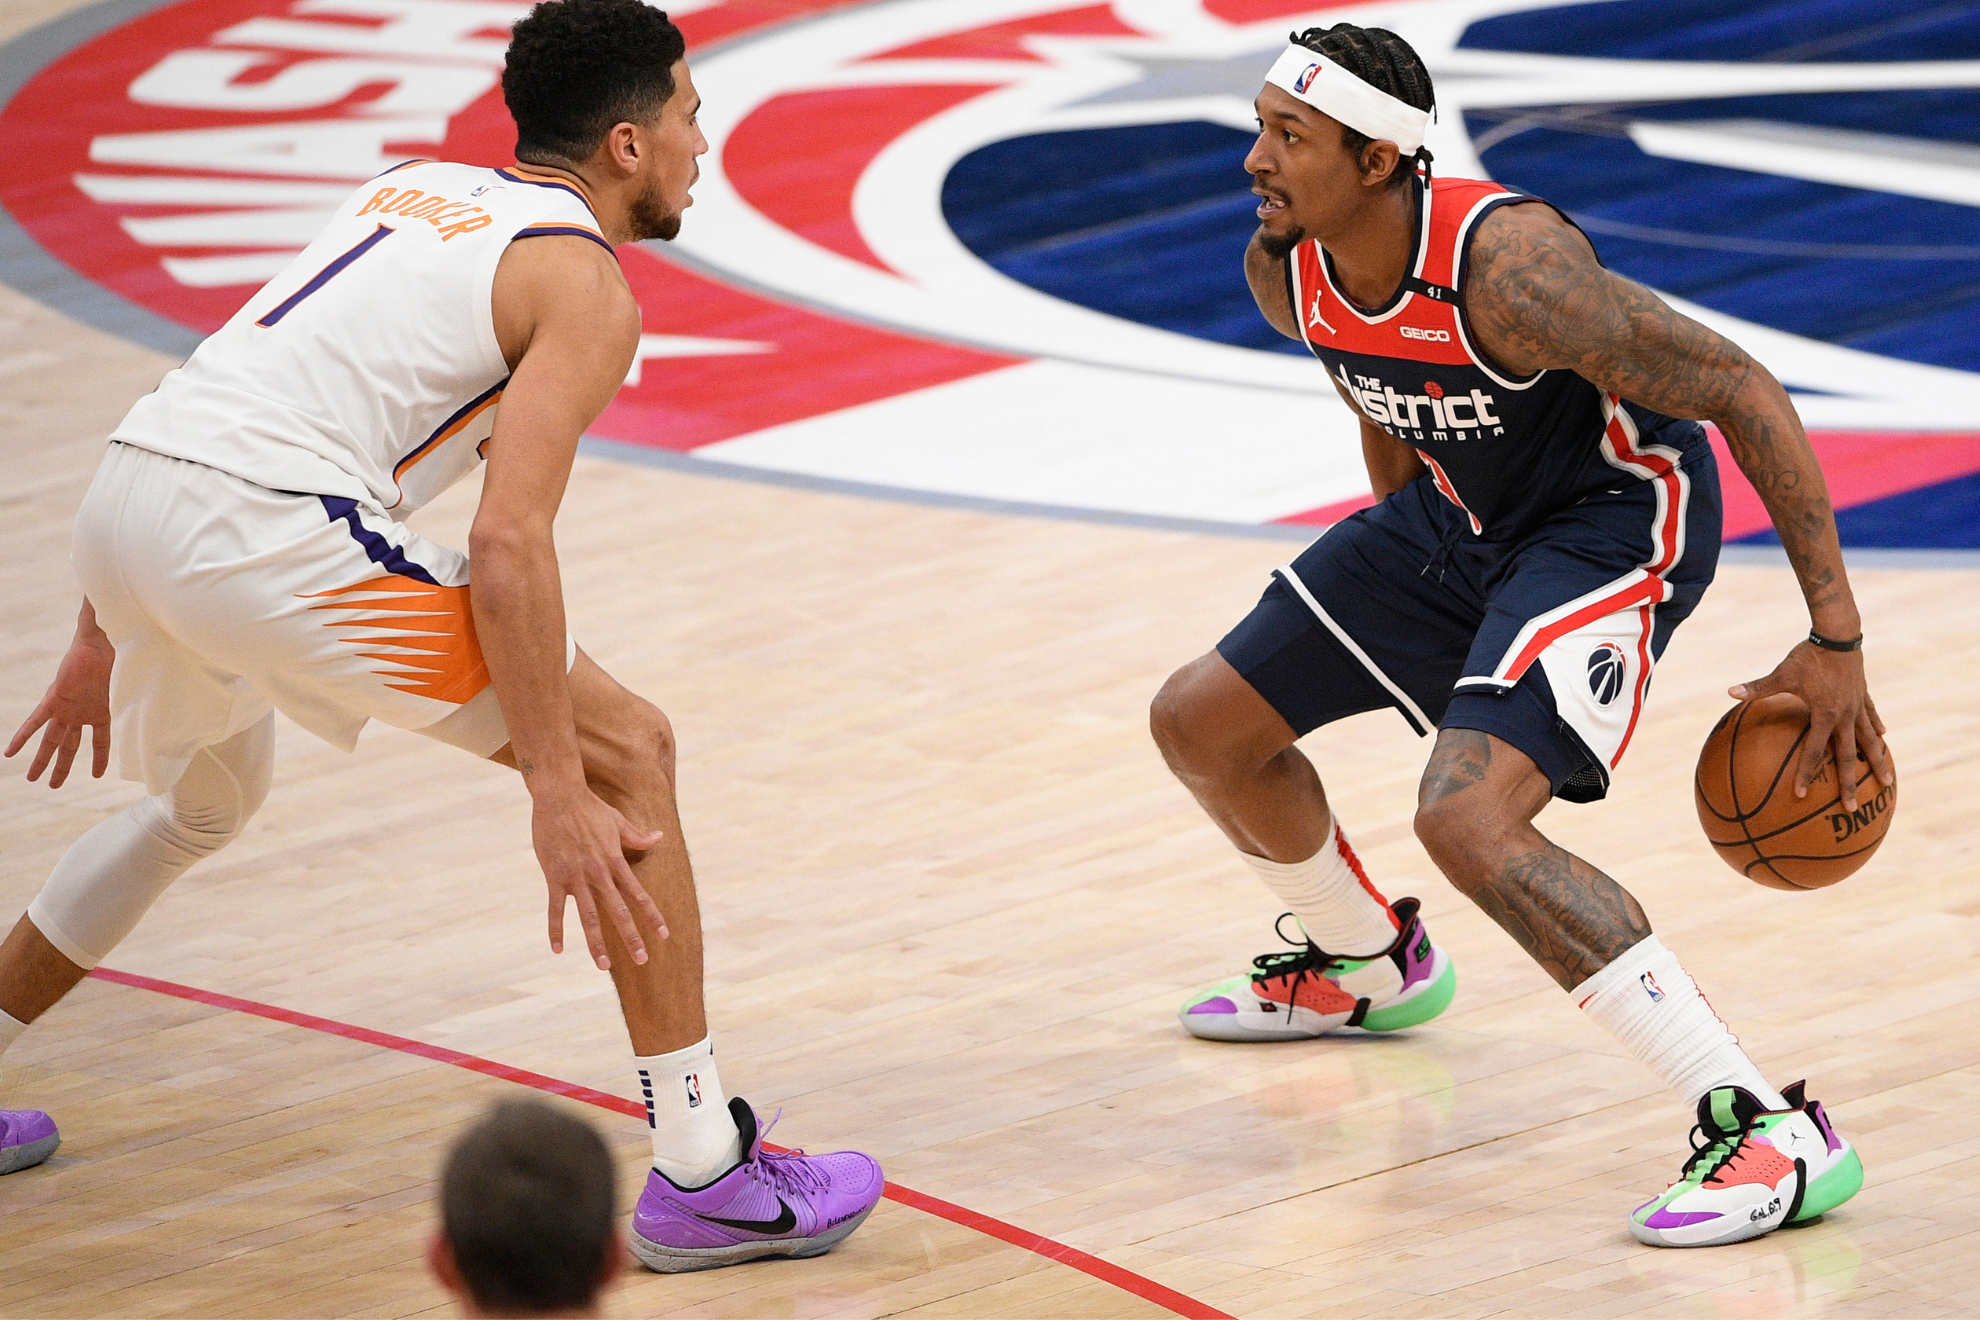 New teammates Booker and Beal will fight for a championship in Phoenix.